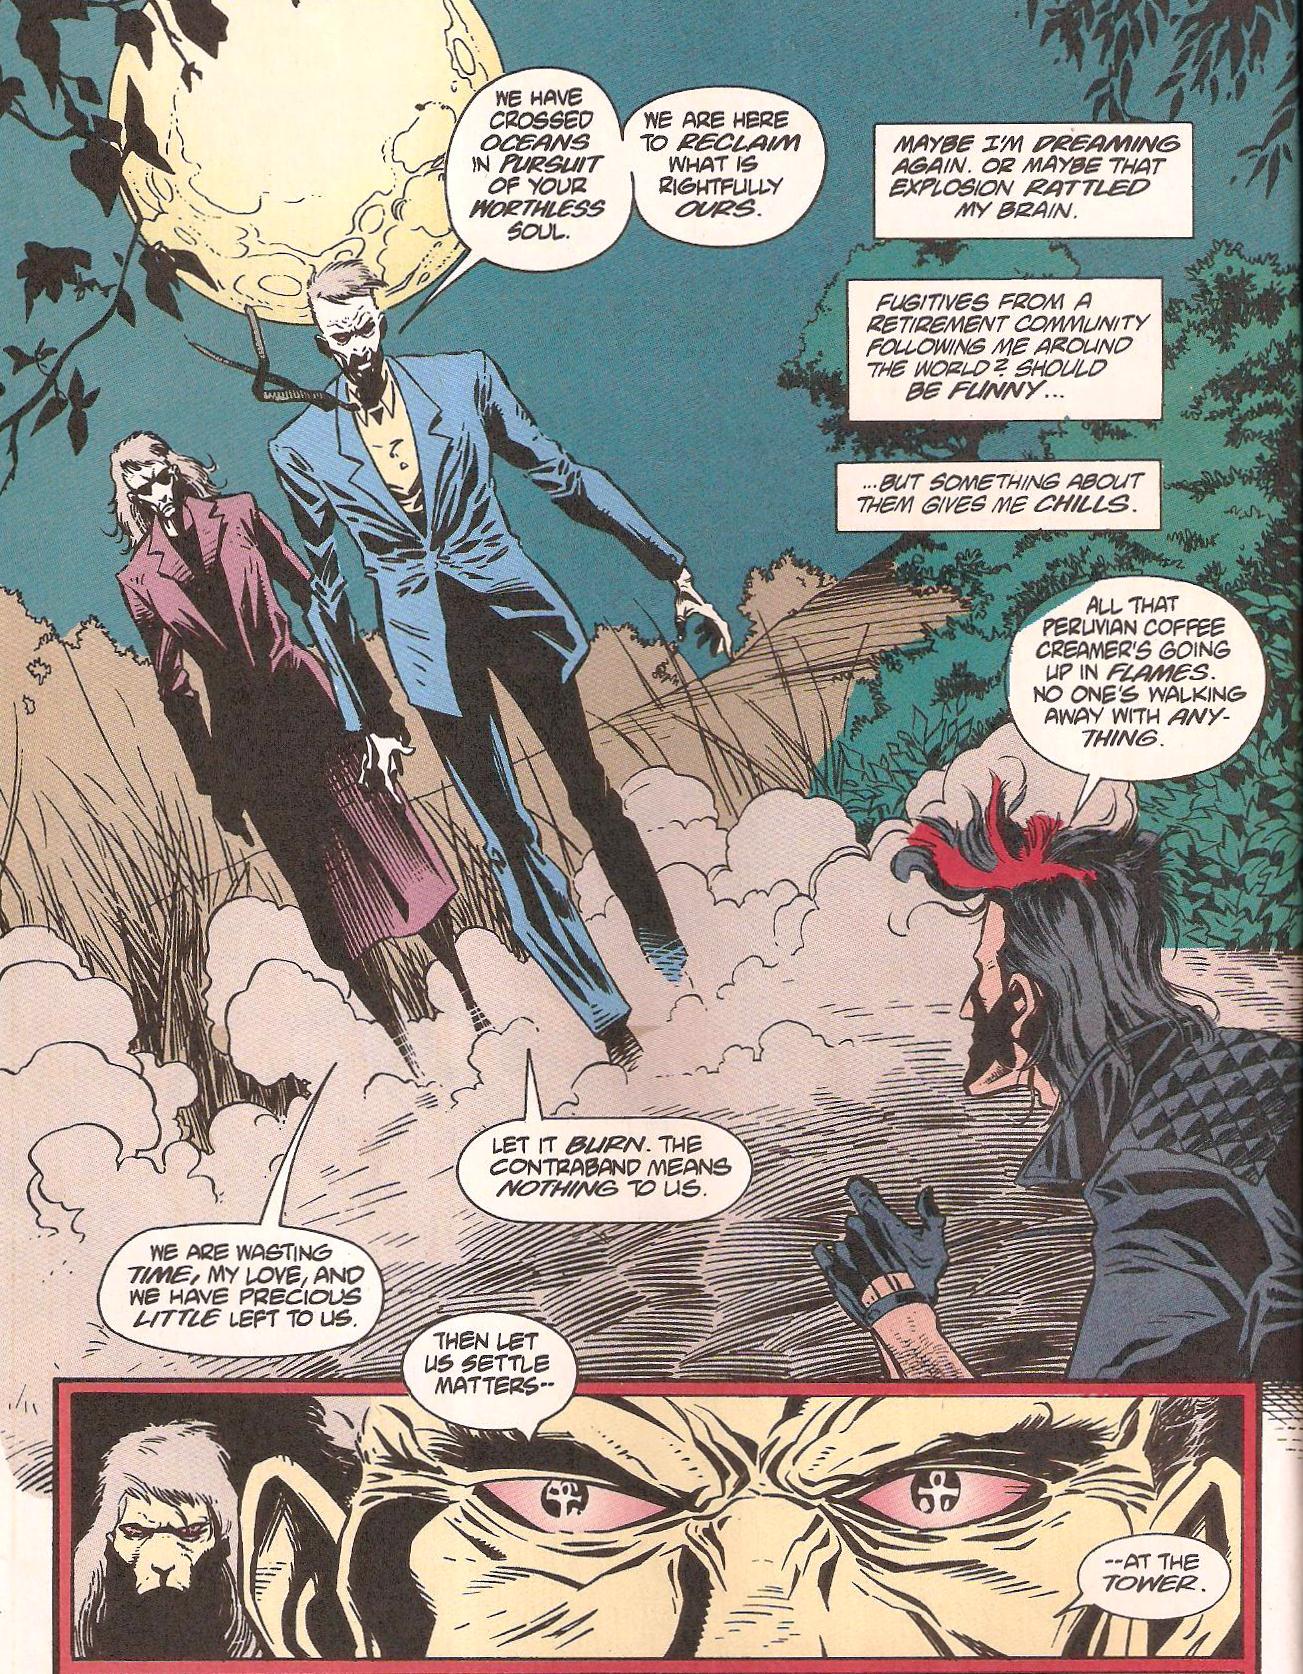 From Fate #0 (1994)